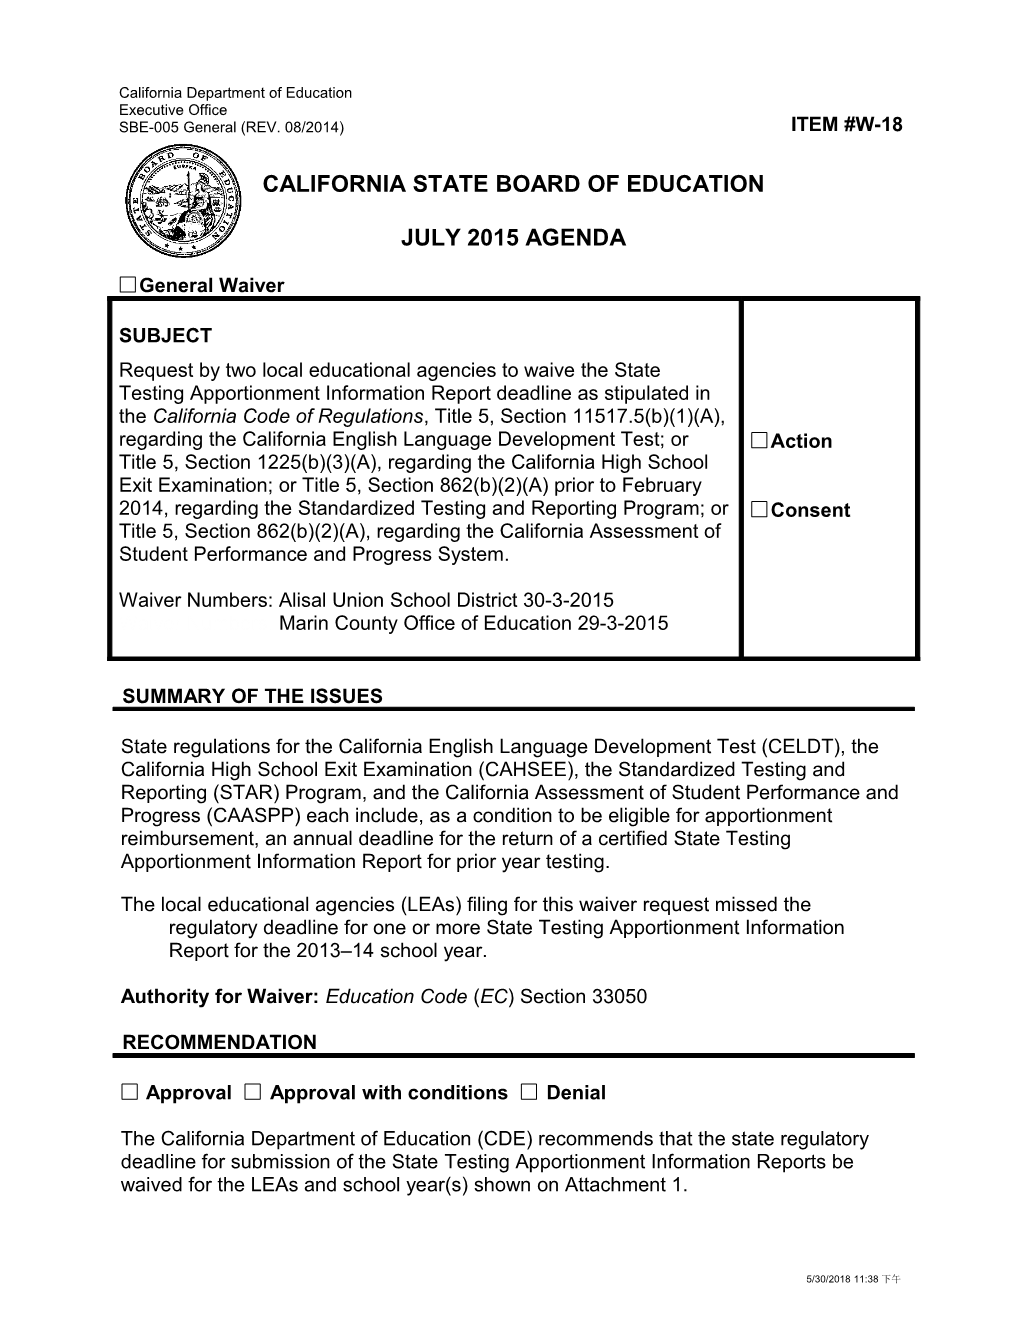 July 2015 Waiver Item W-18 - Meeting Agendas (CA State Board of Education)